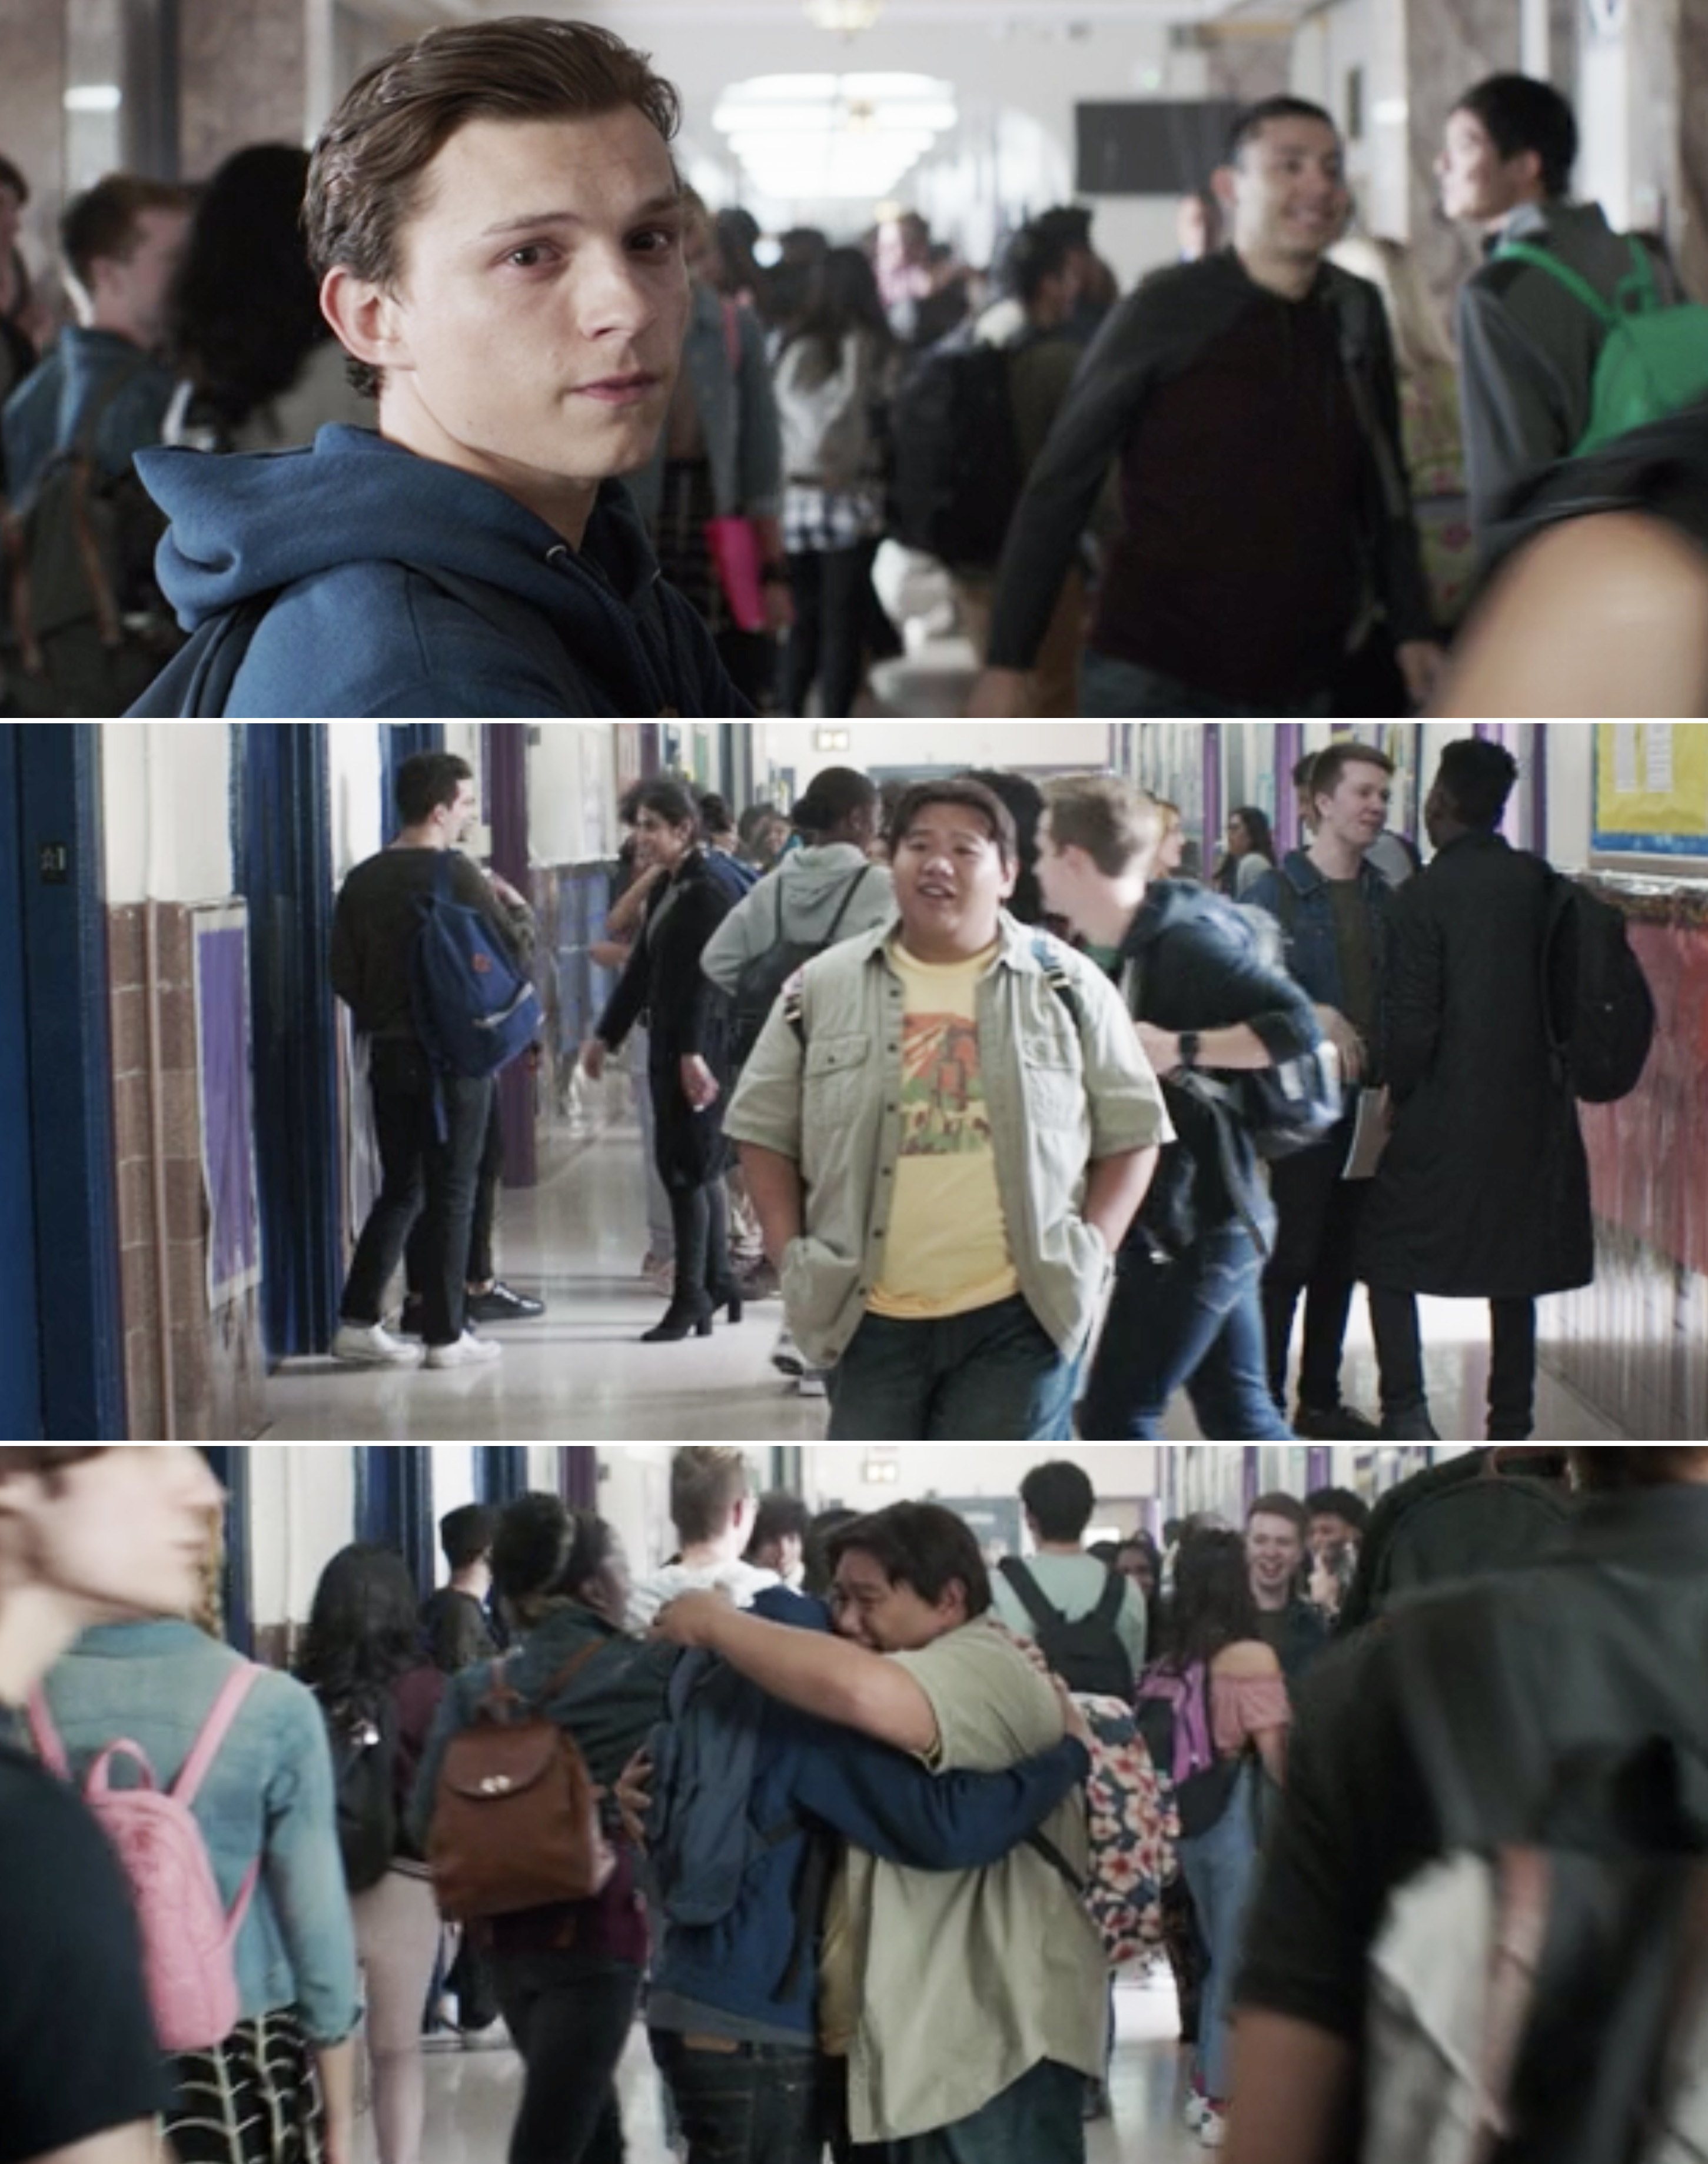 Peter and Ned hugging in the school hallway